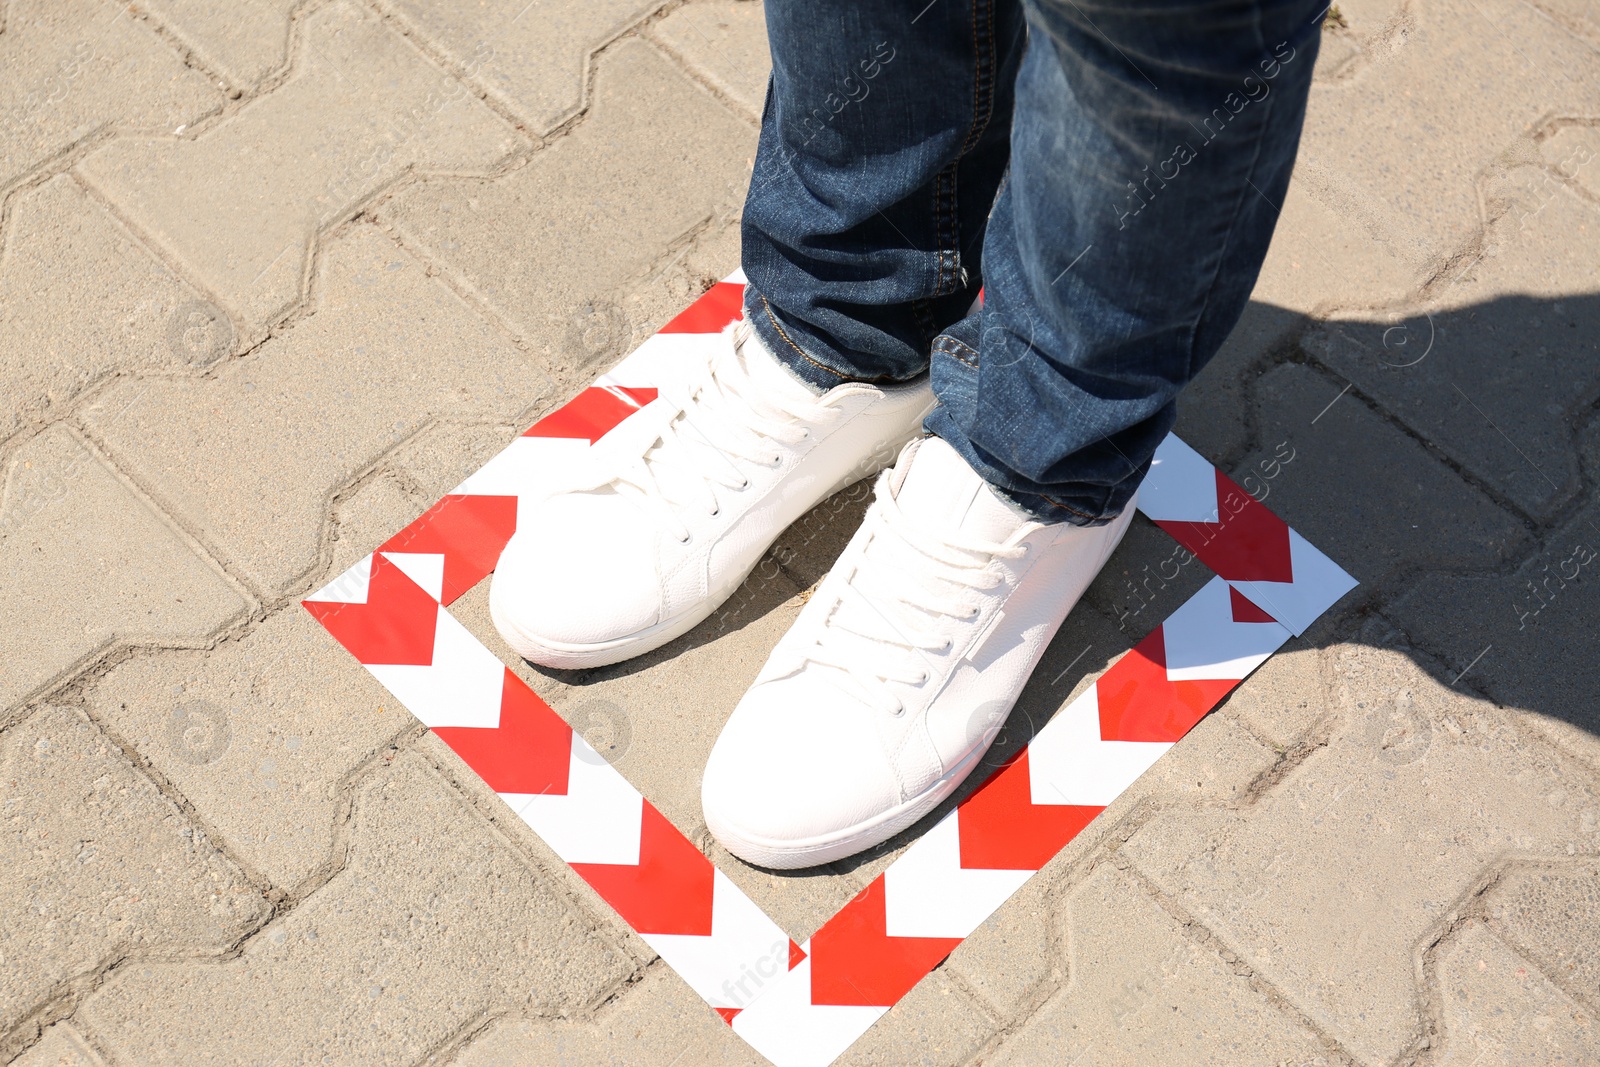 Photo of Man standing on taped floor marking for social distance outdoors, closeup. Coronavirus pandemic